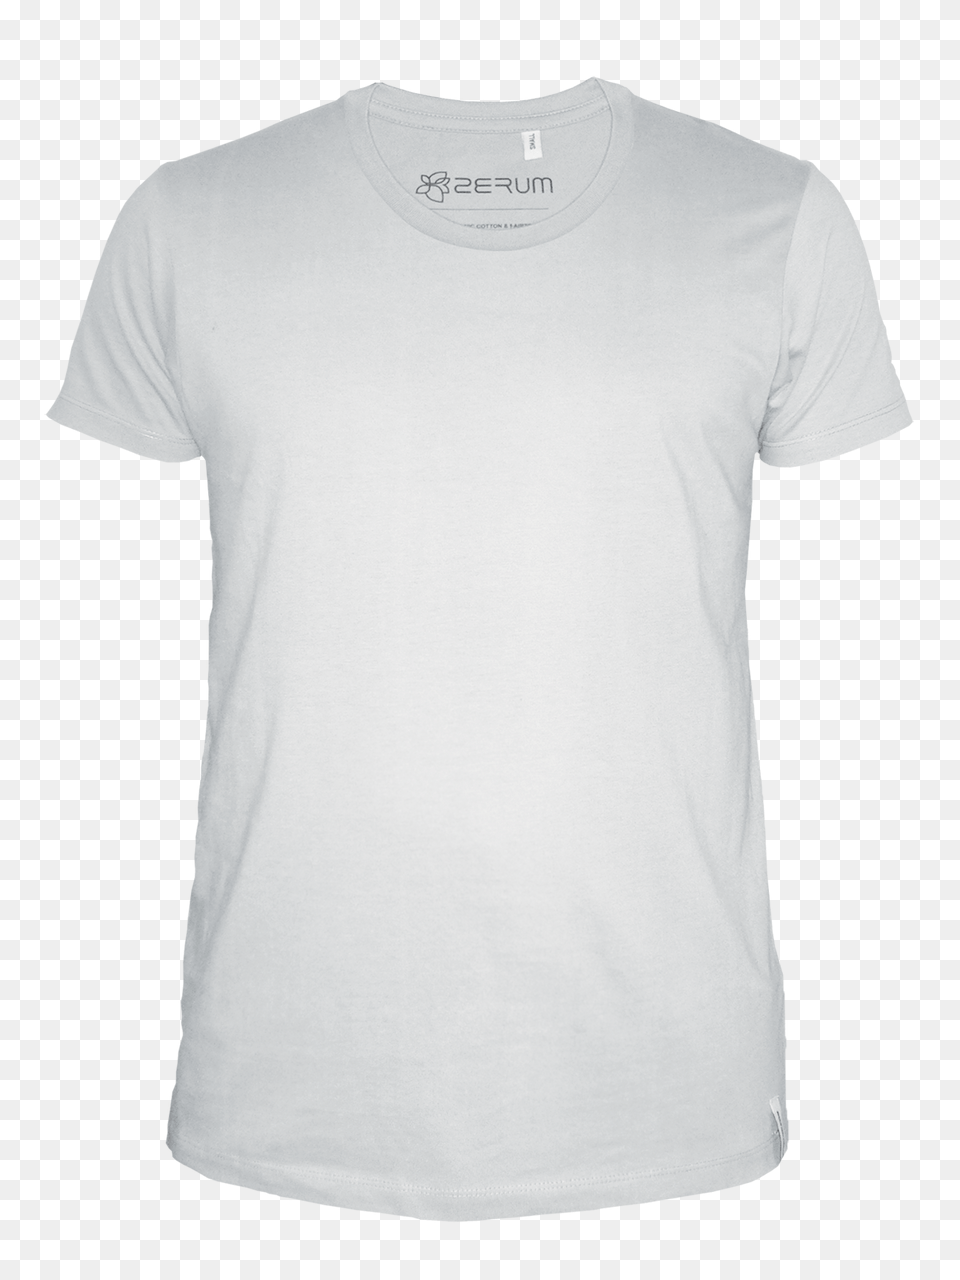 White T Shirt Template White T Shirt Clipart Free Download, Clothing, T-shirt Png